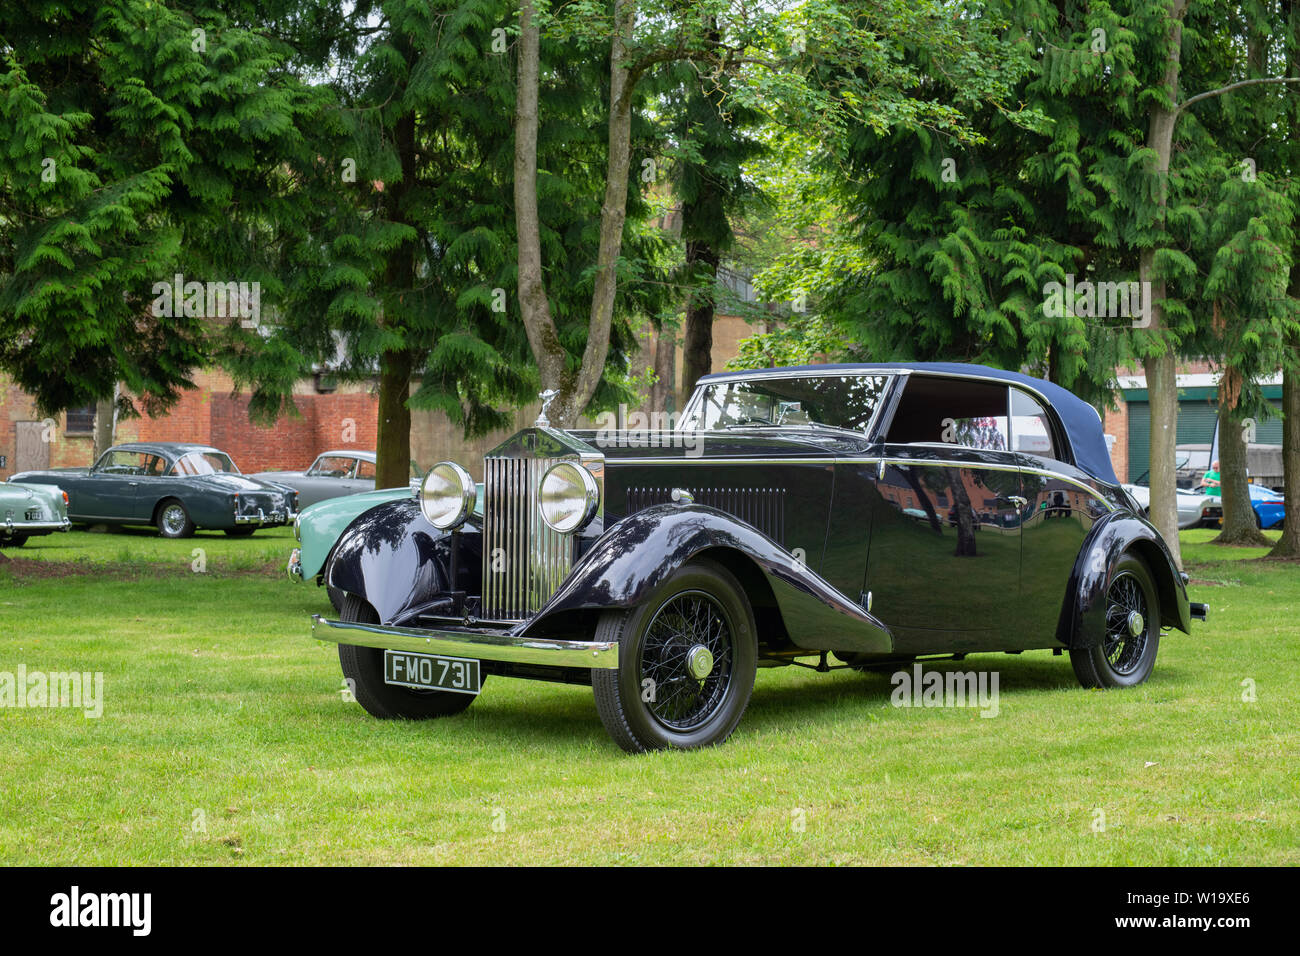 1932 Rolls Royce 20/25 Auto in Bicester Heritage Center super Jagtfall. Bicester, Oxfordshire, England Stockfoto